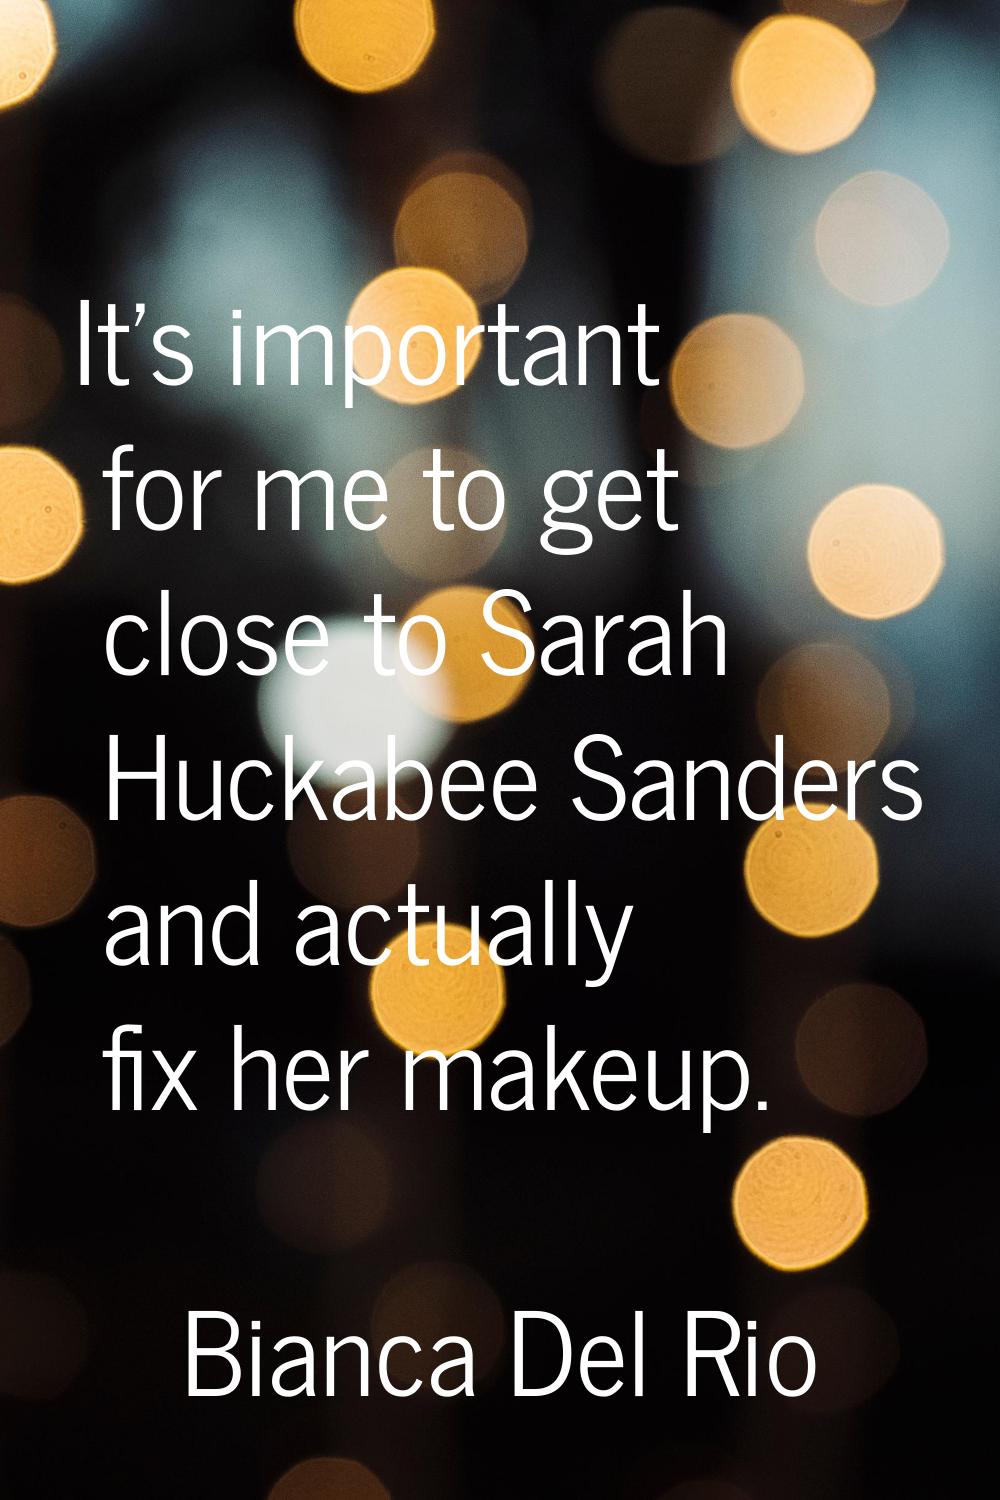 It's important for me to get close to Sarah Huckabee Sanders and actually fix her makeup.